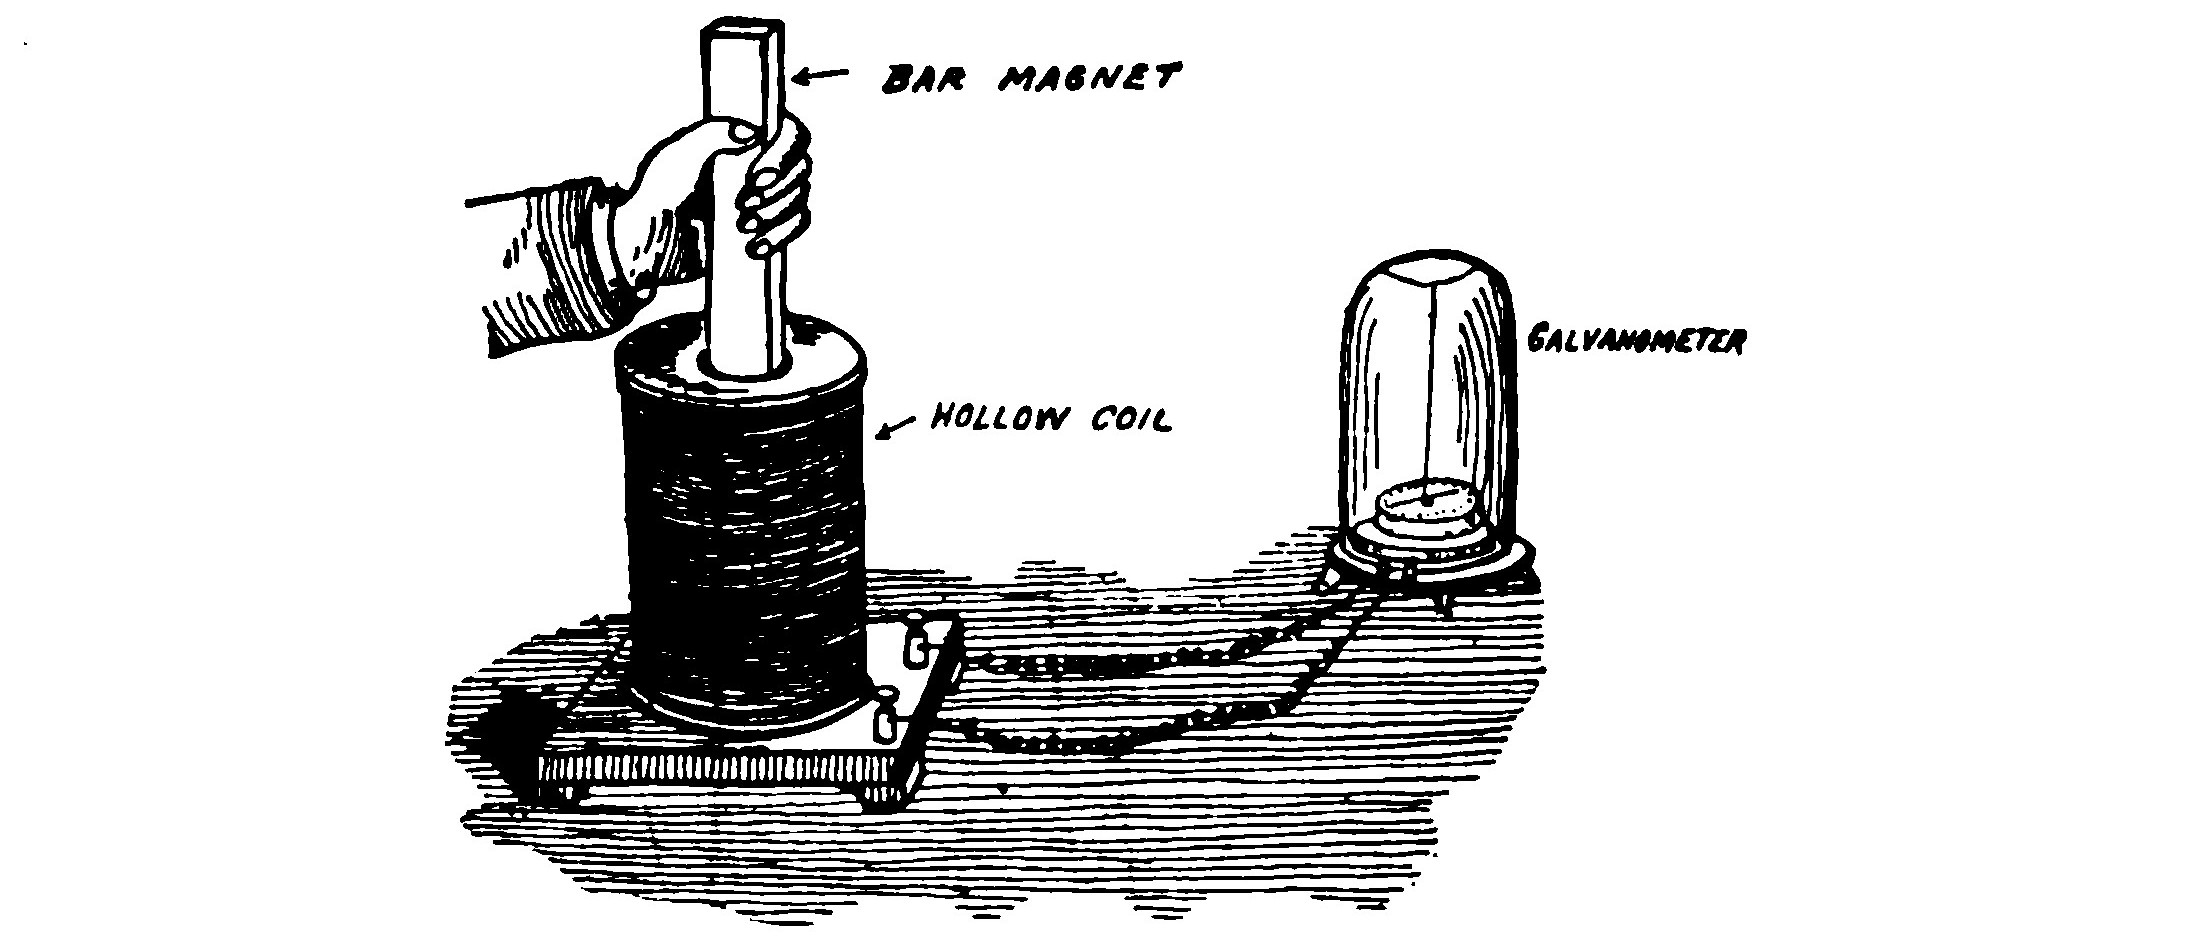 FIG. 179.—When a Bar Magnet is plunged into a Hollow Coil of Wire, a Momentary Current of Electricity is Generated.